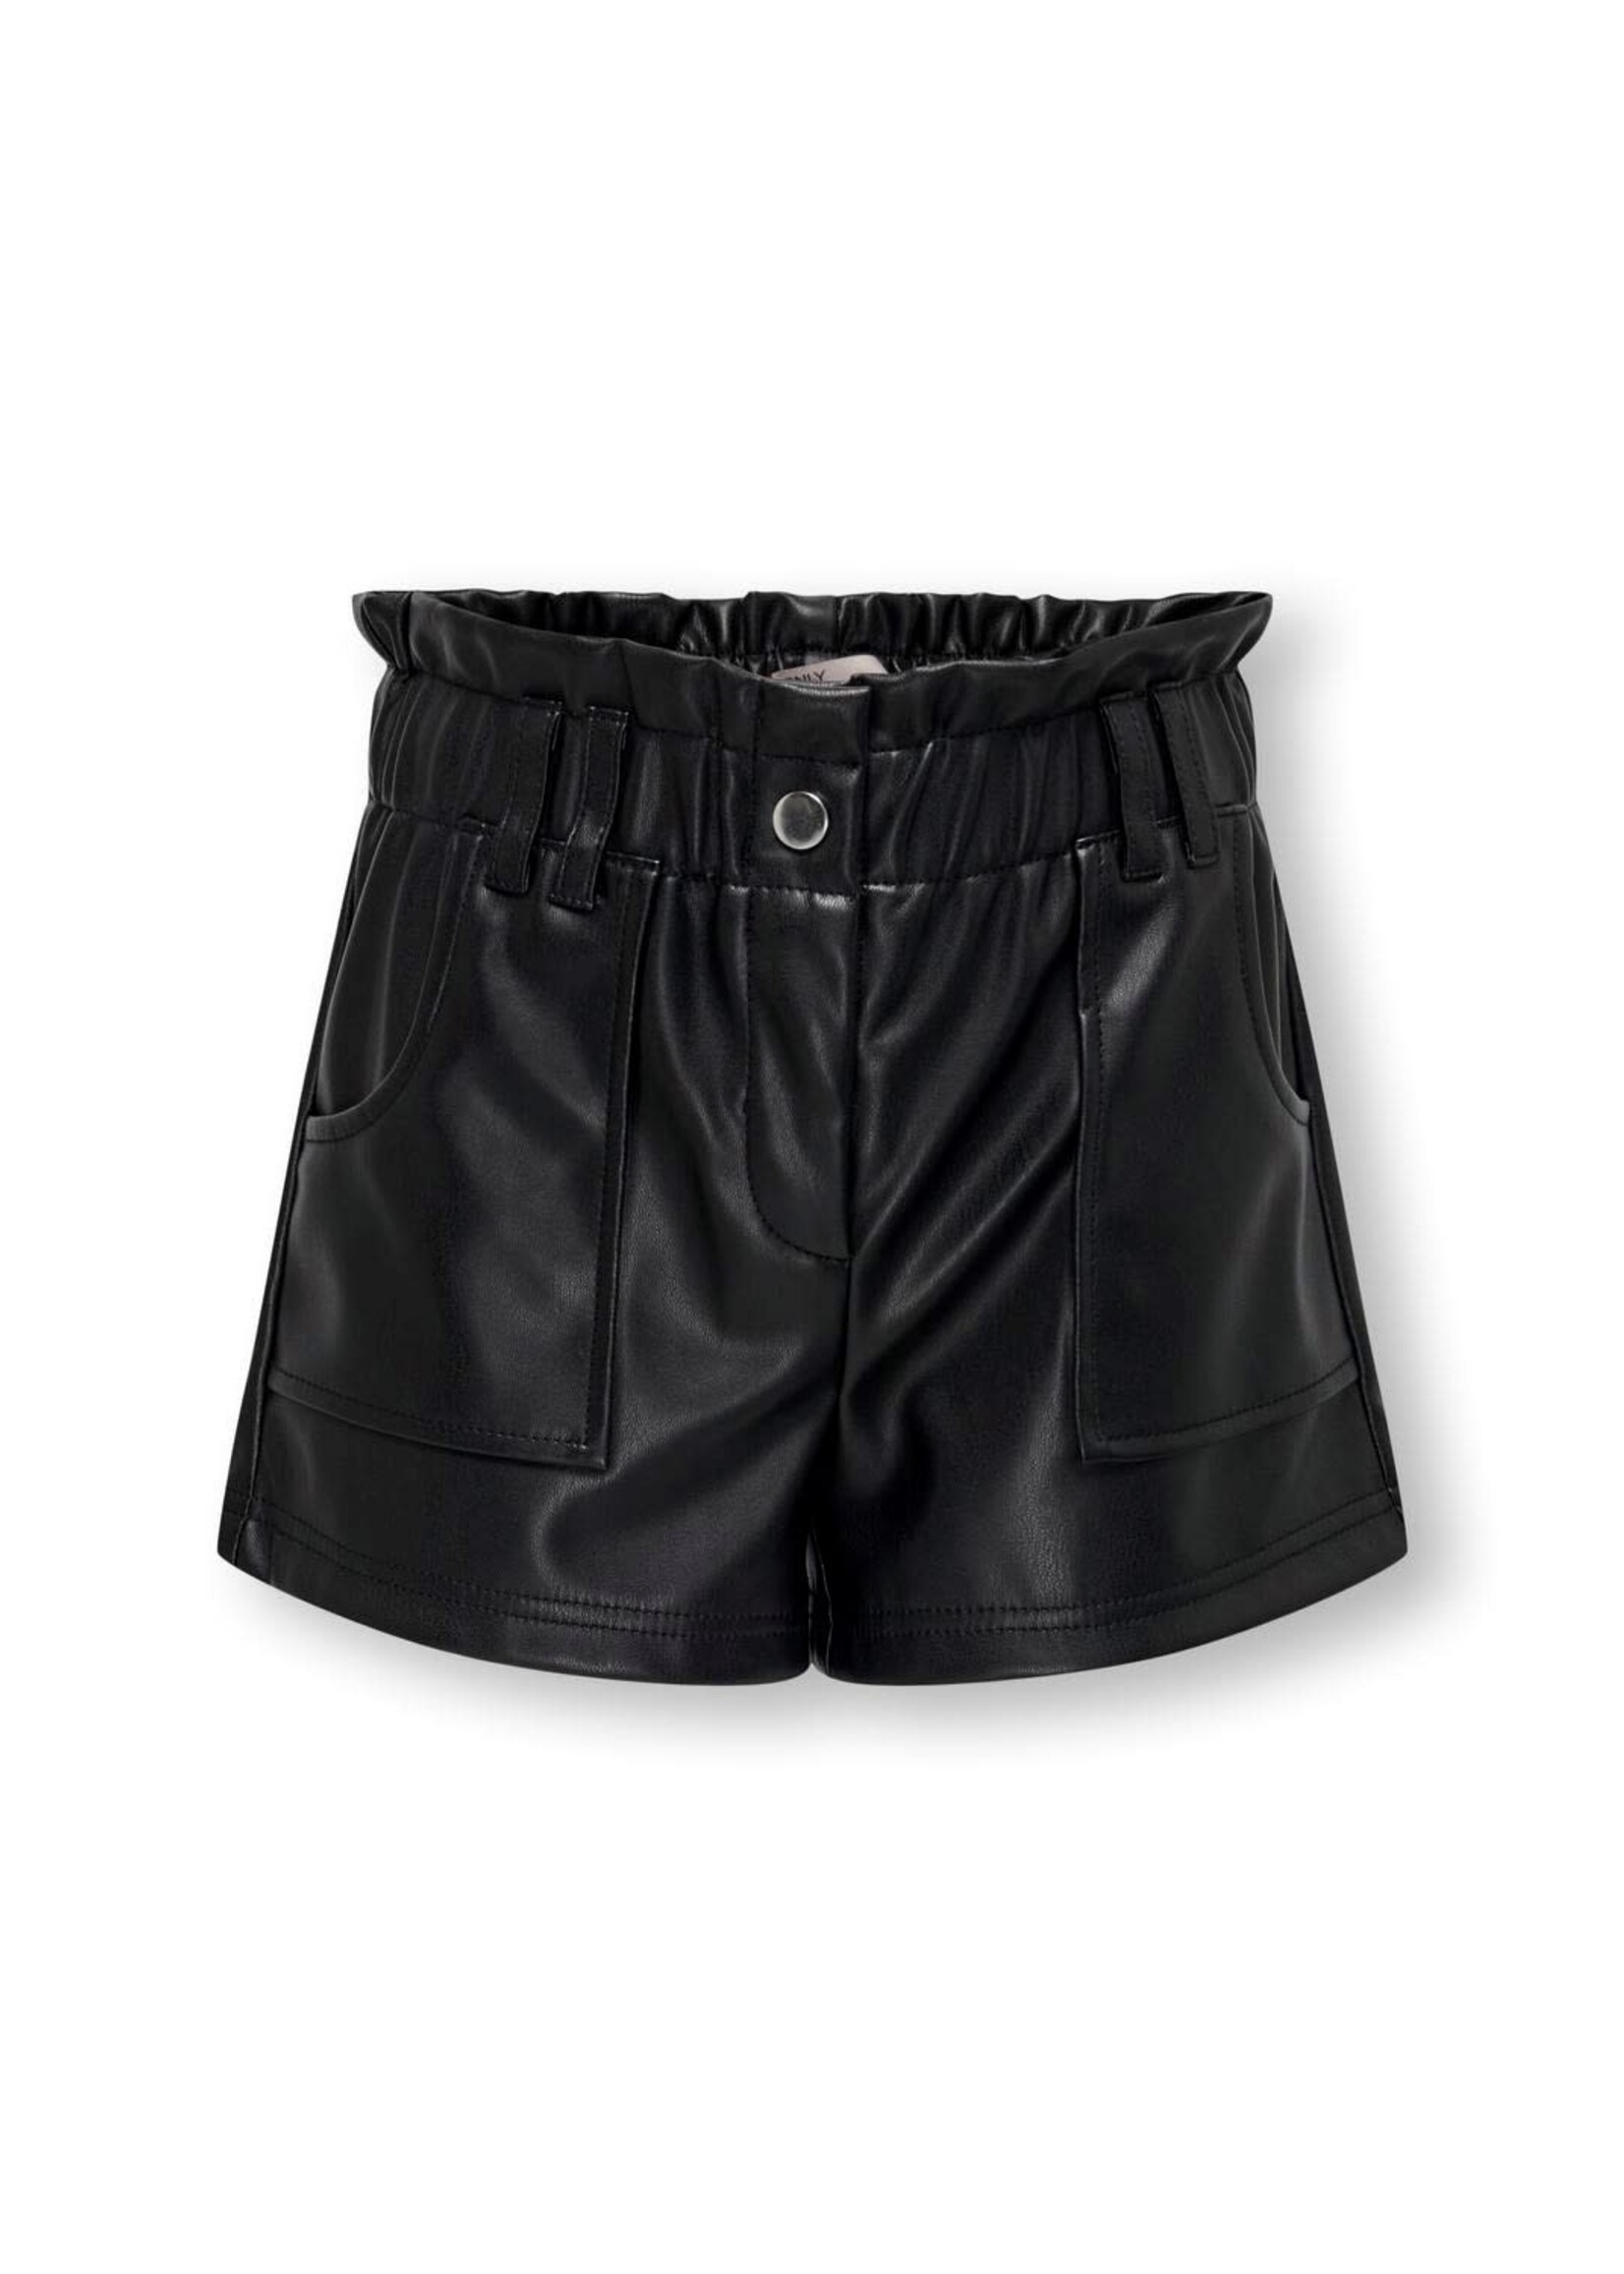 KIDS ONLY Stephanie Faux Leather Short Black